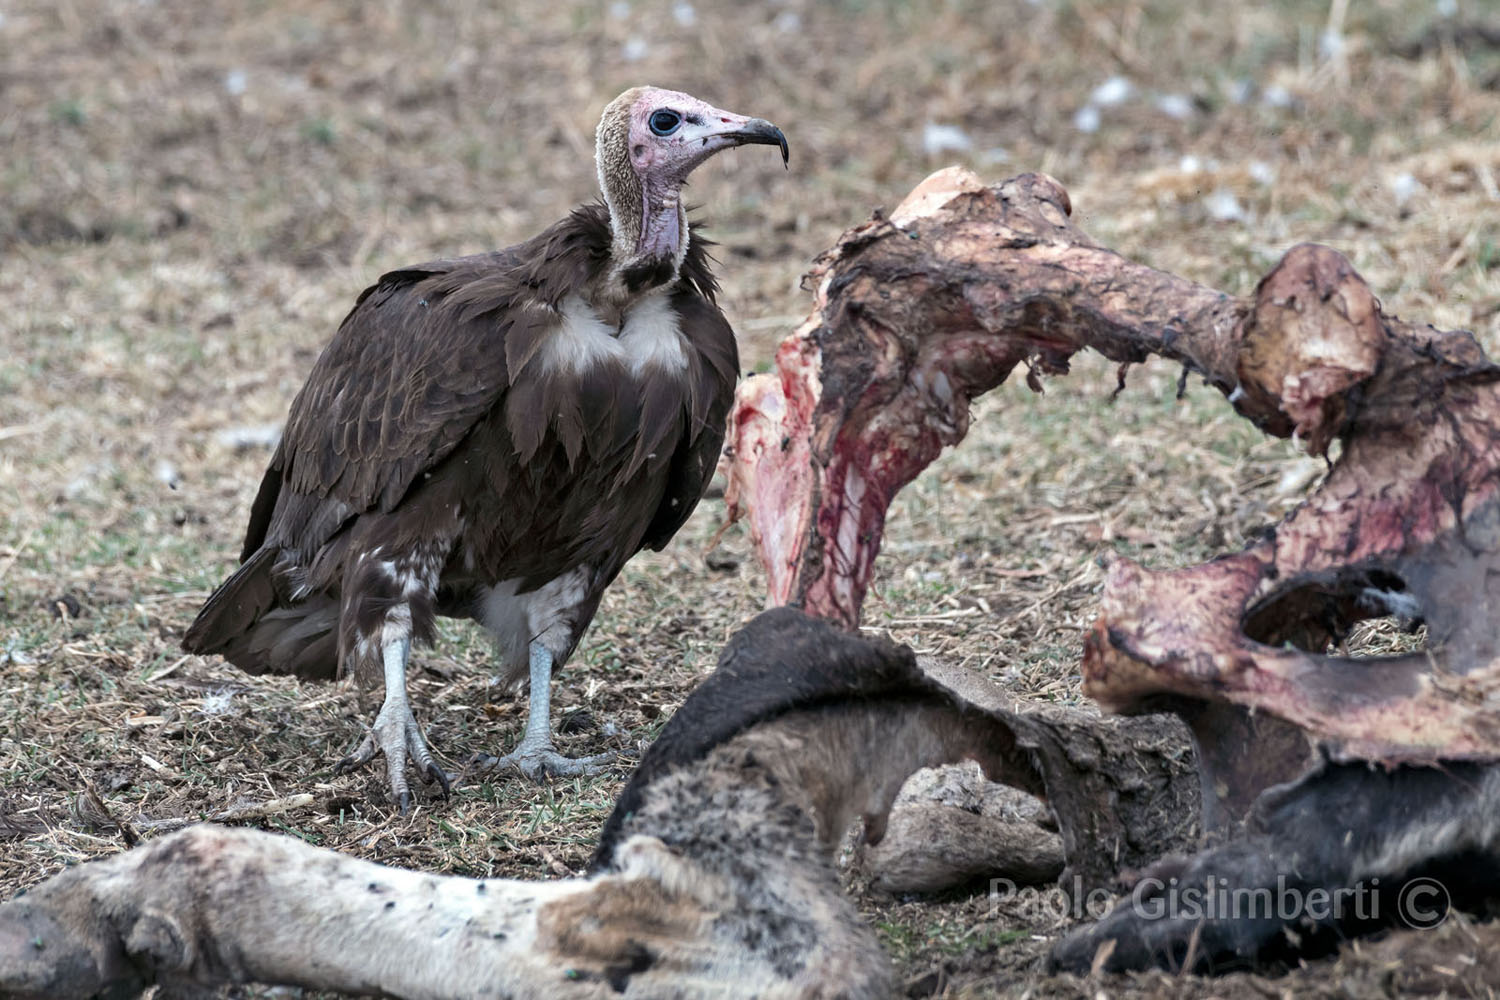 Hooded Vulture 